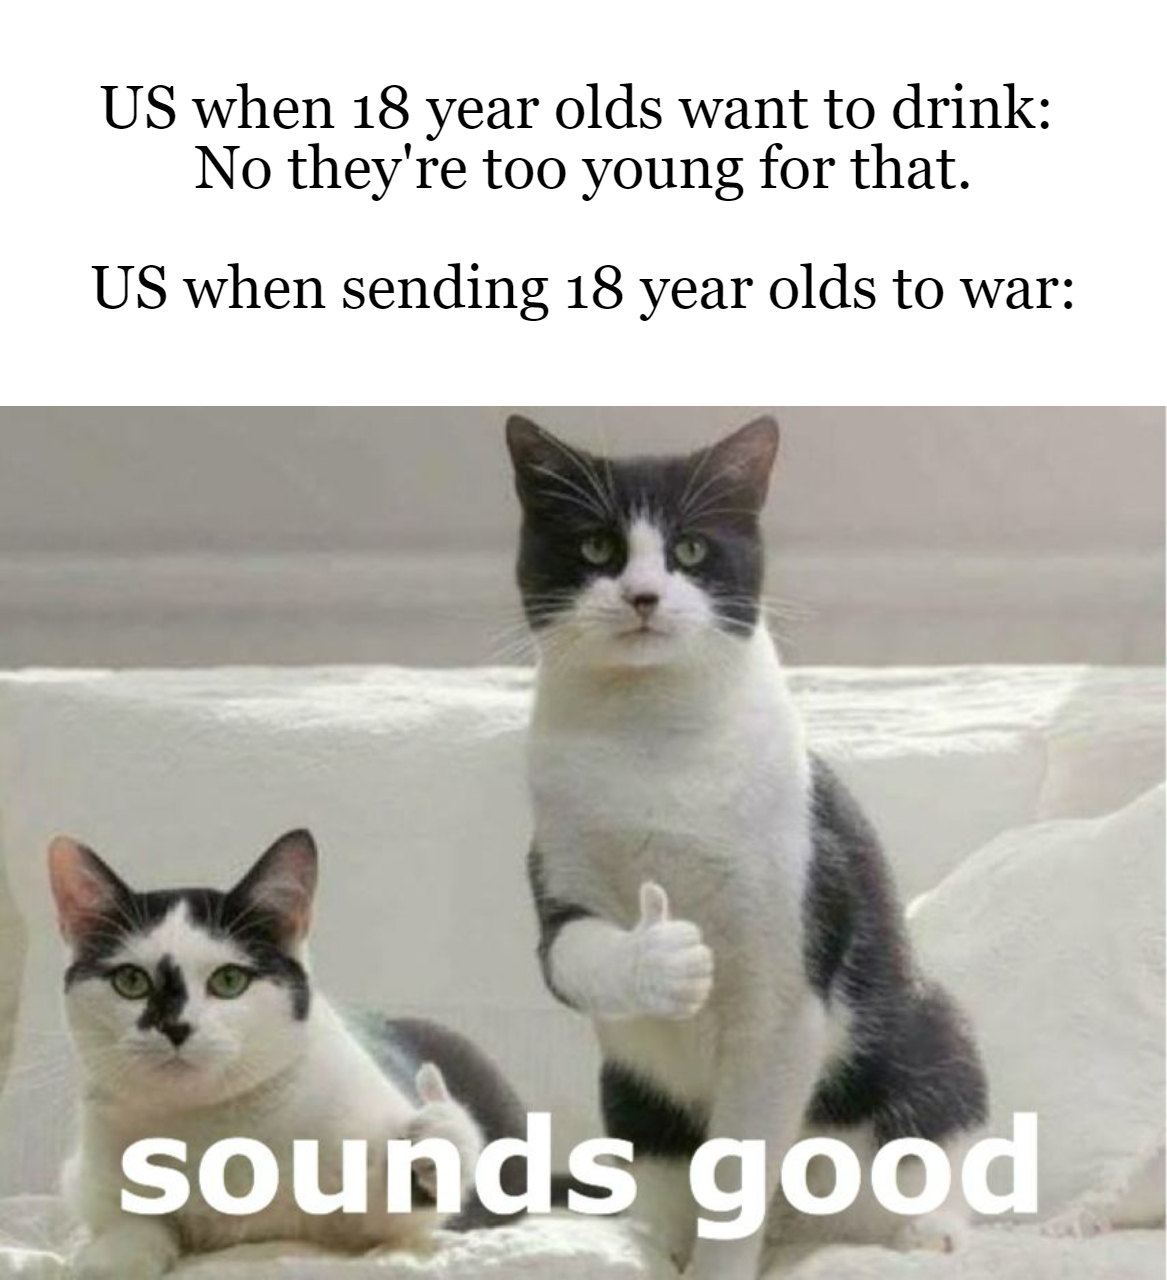 funny memes - quotes - Us when 18 year olds want to drink No they're too young for that. Us when sending 18 year olds to war sounds good